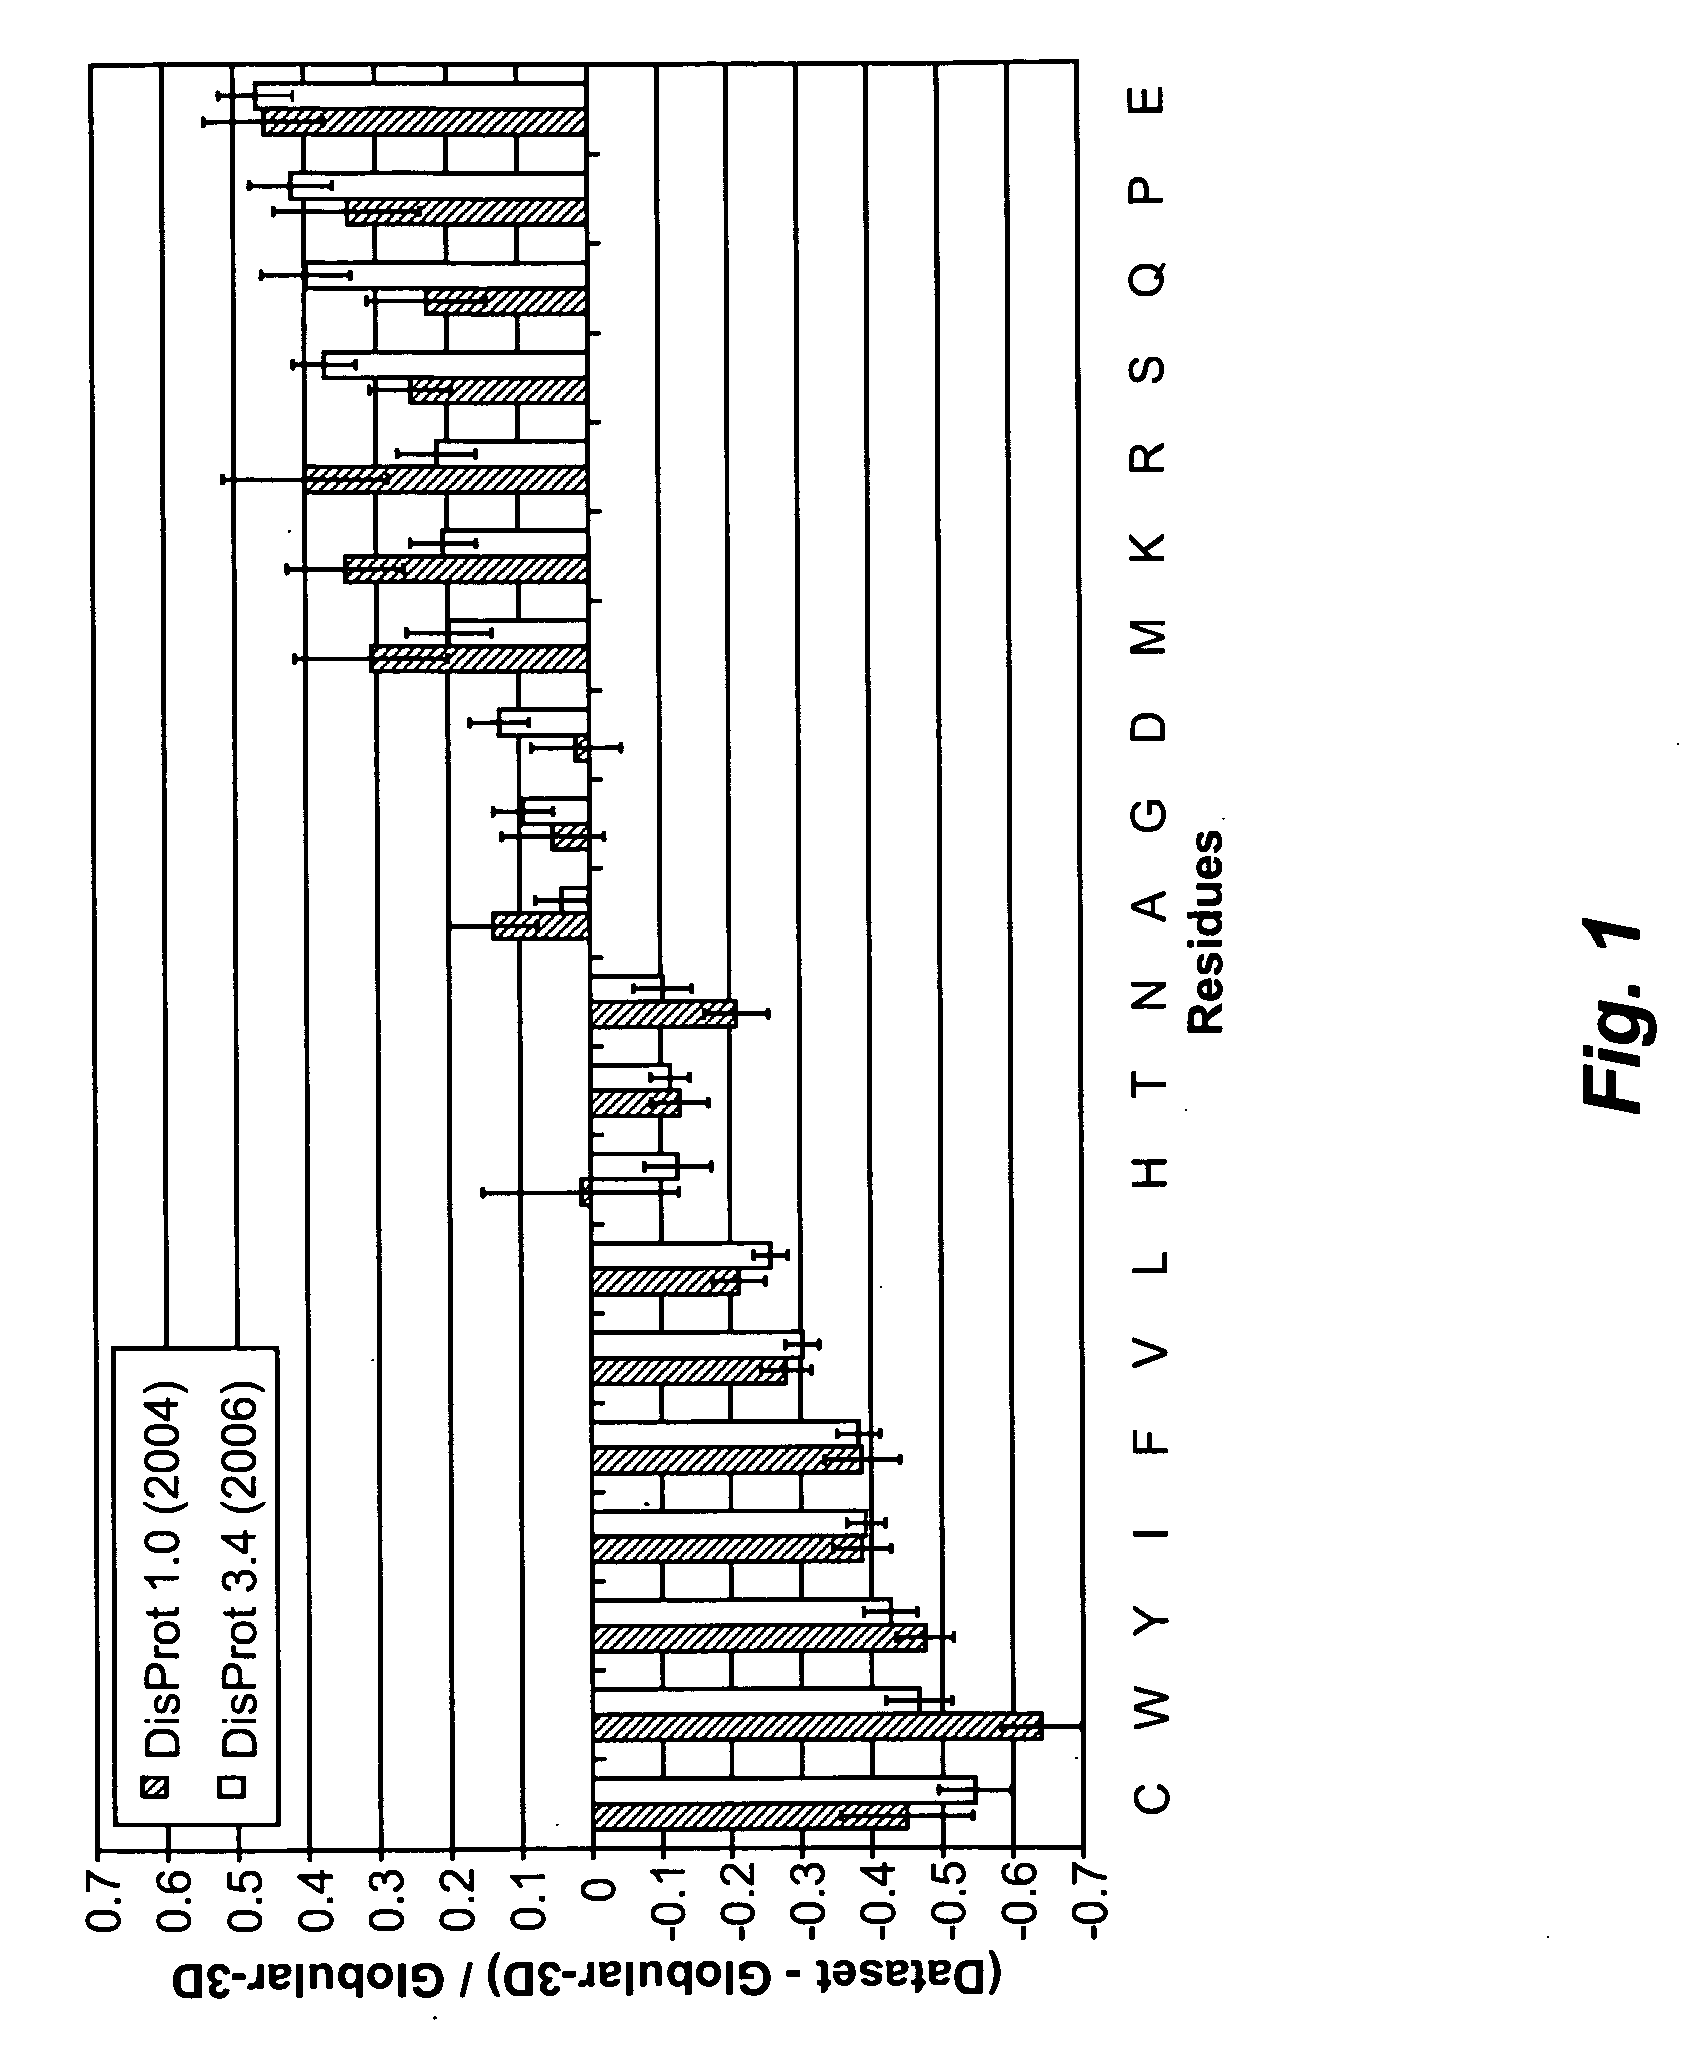 Artificial entropic bristle domain sequences and their use in recombinant protein production